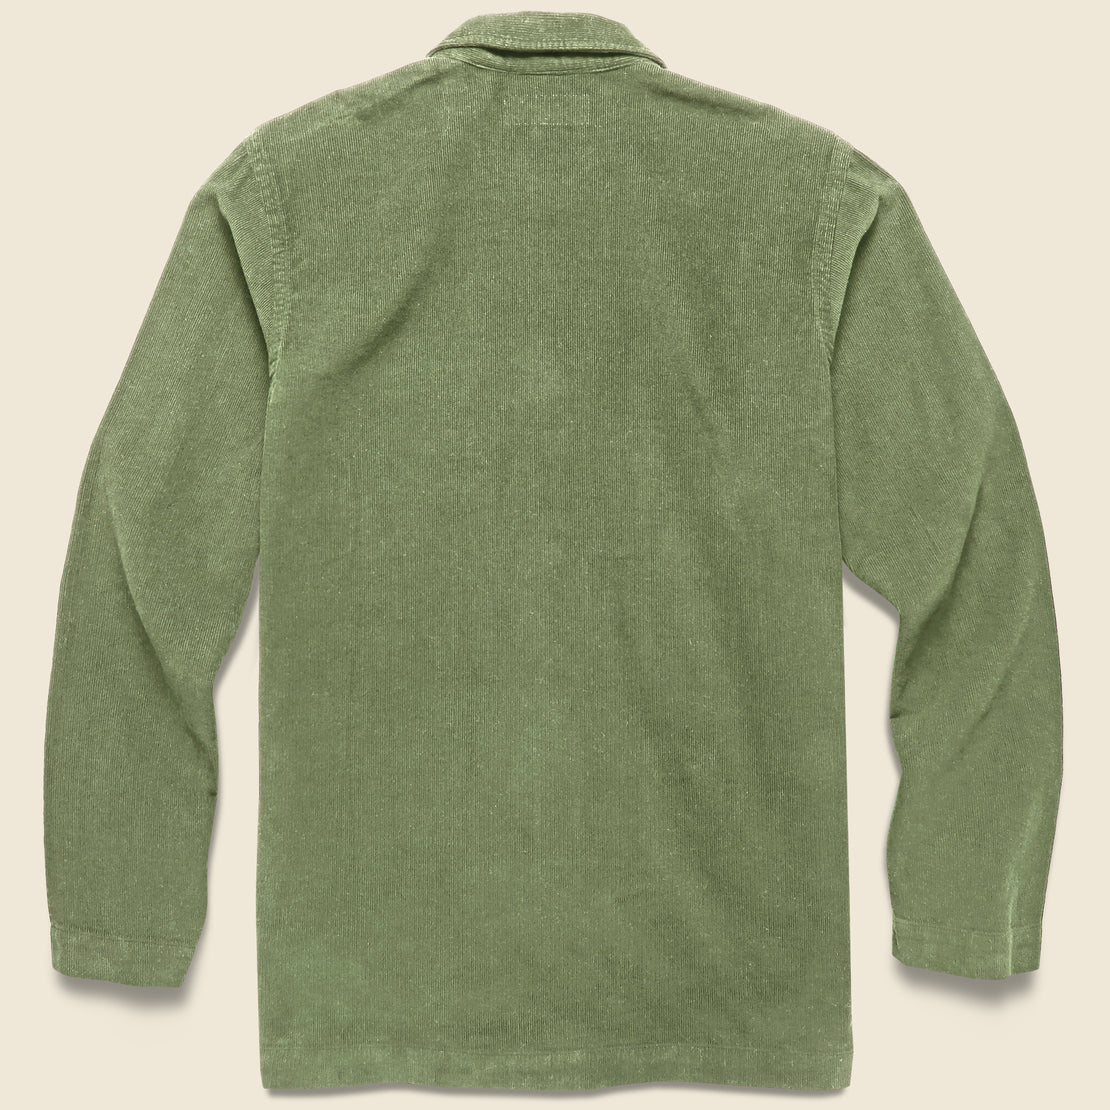 Bakers Fine Cord Overshirt - Olive - Universal Works - STAG Provisions - Tops - L/S Woven - Overshirt